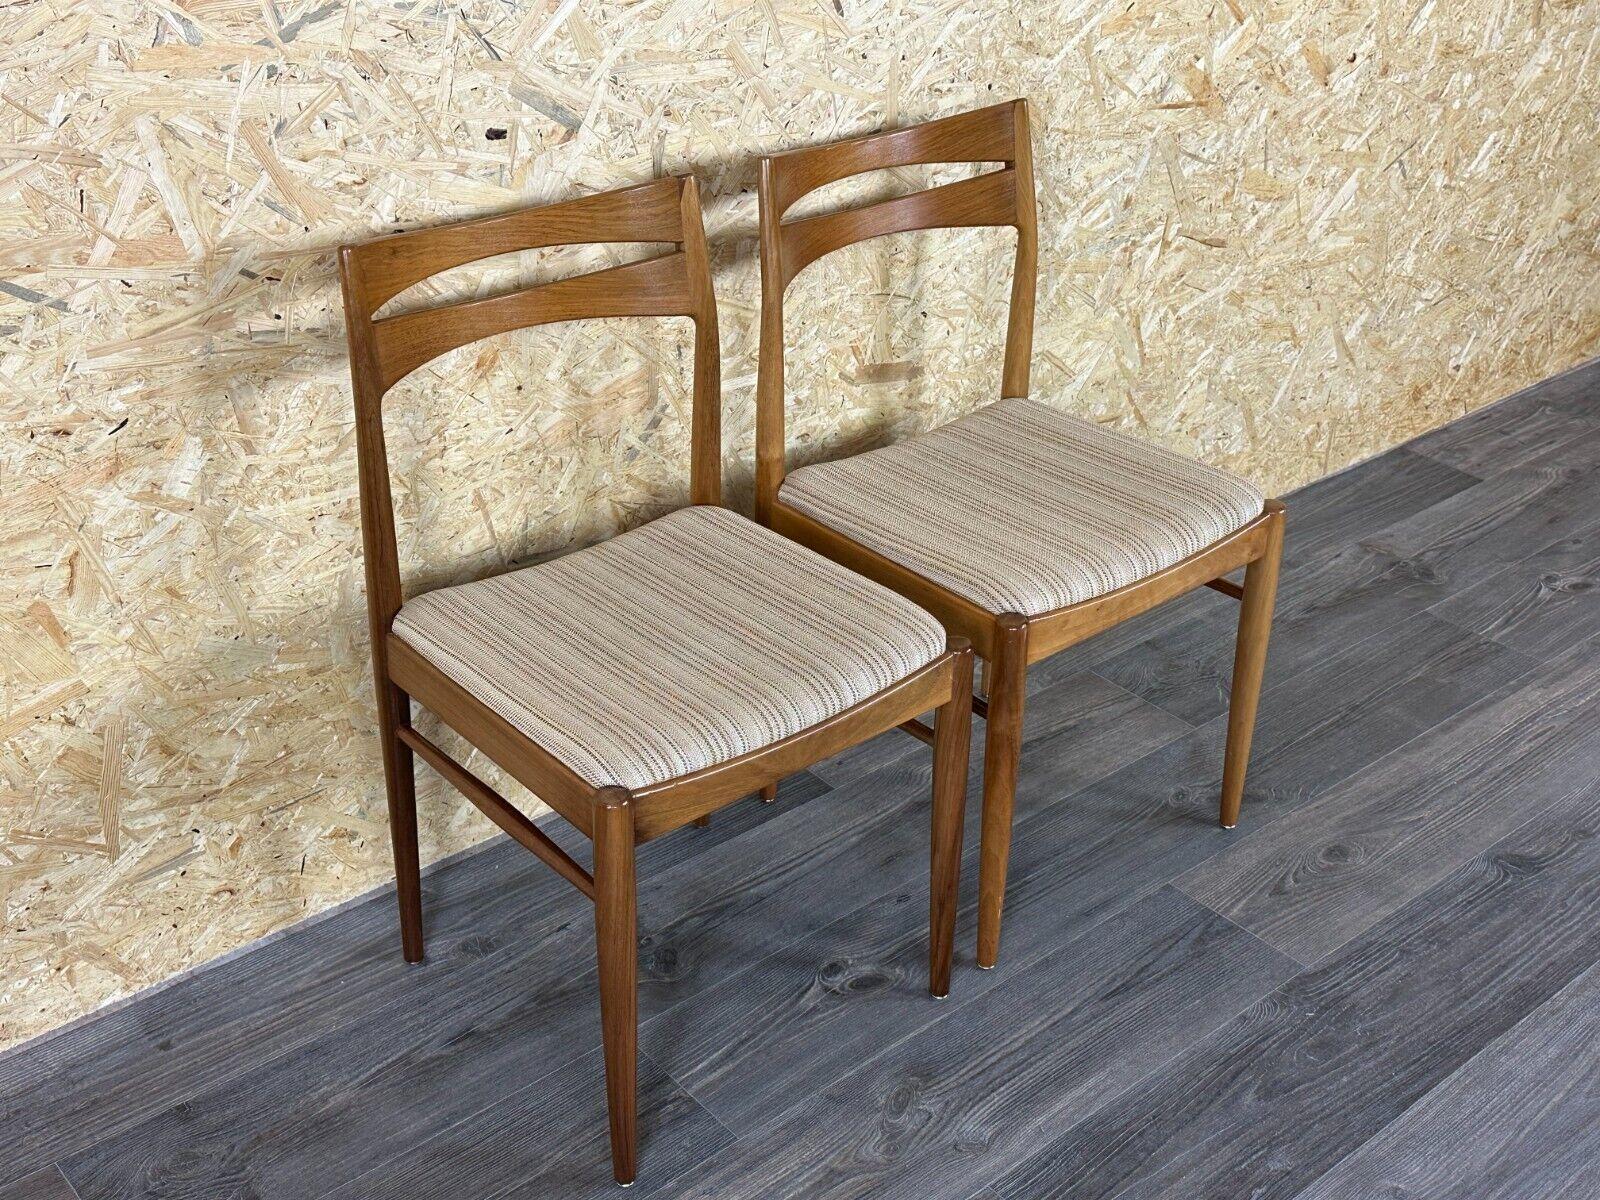 Fabric 2x 60s 70s dining chair dining chair mid century Danish modern design For Sale